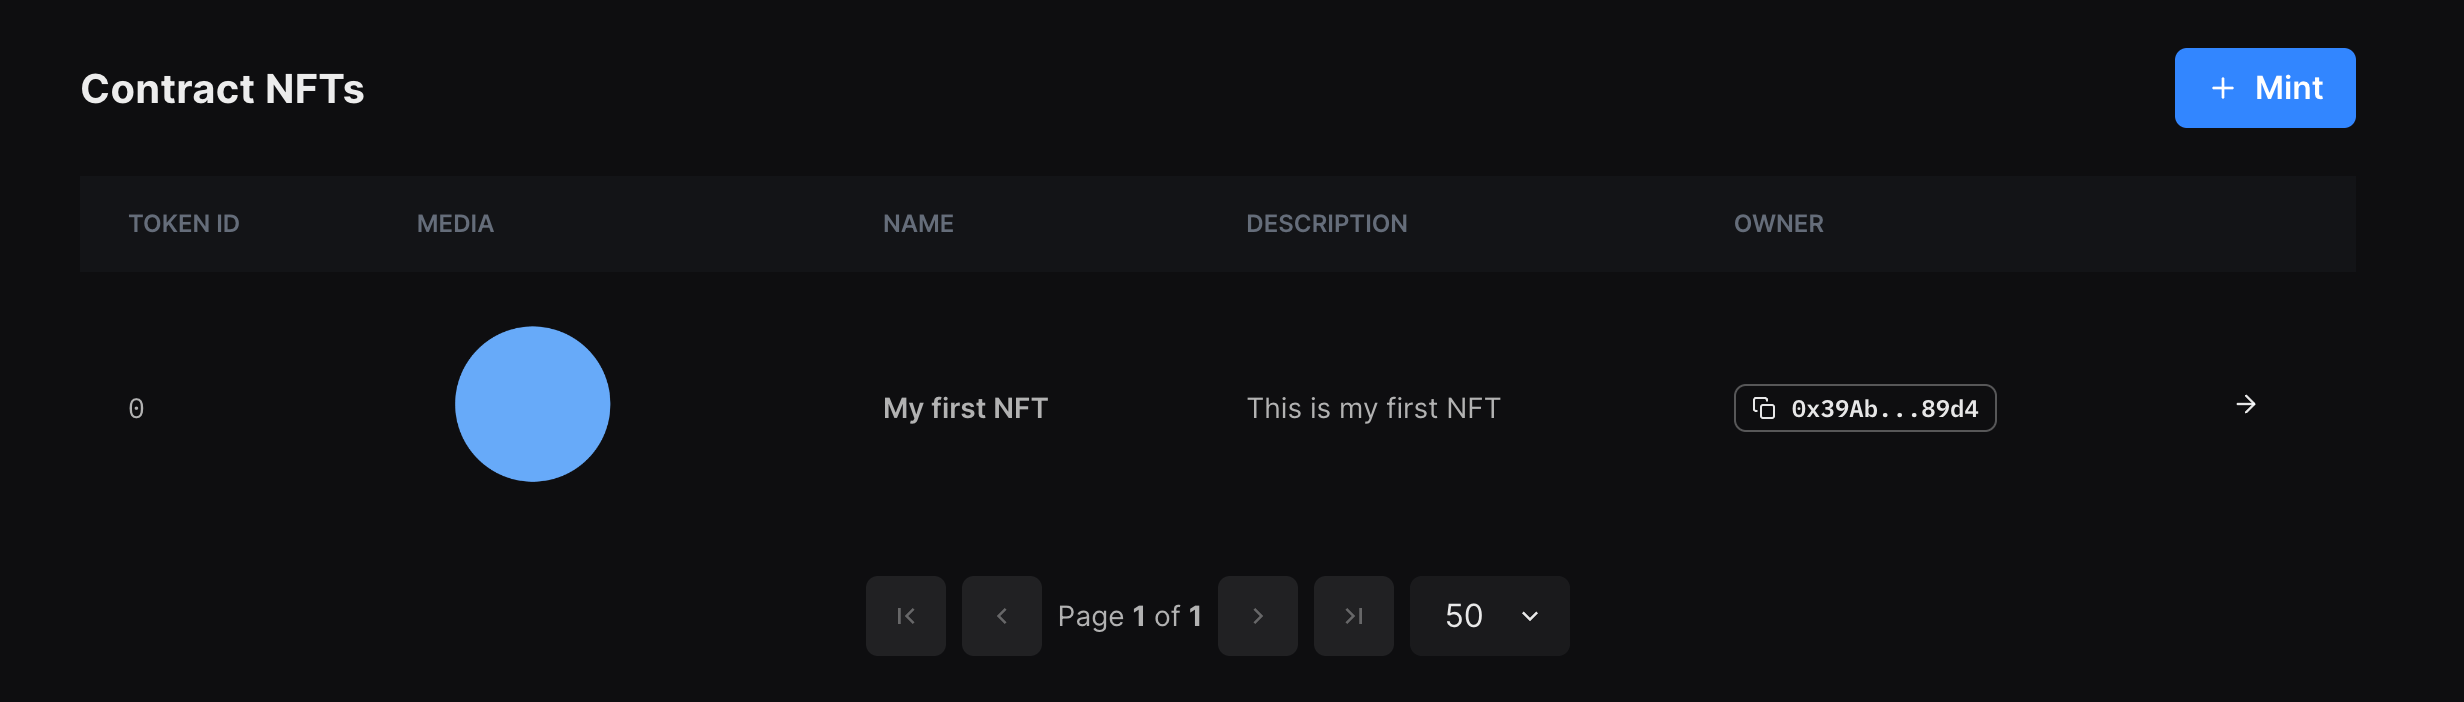 your first NFT has been successfully minted